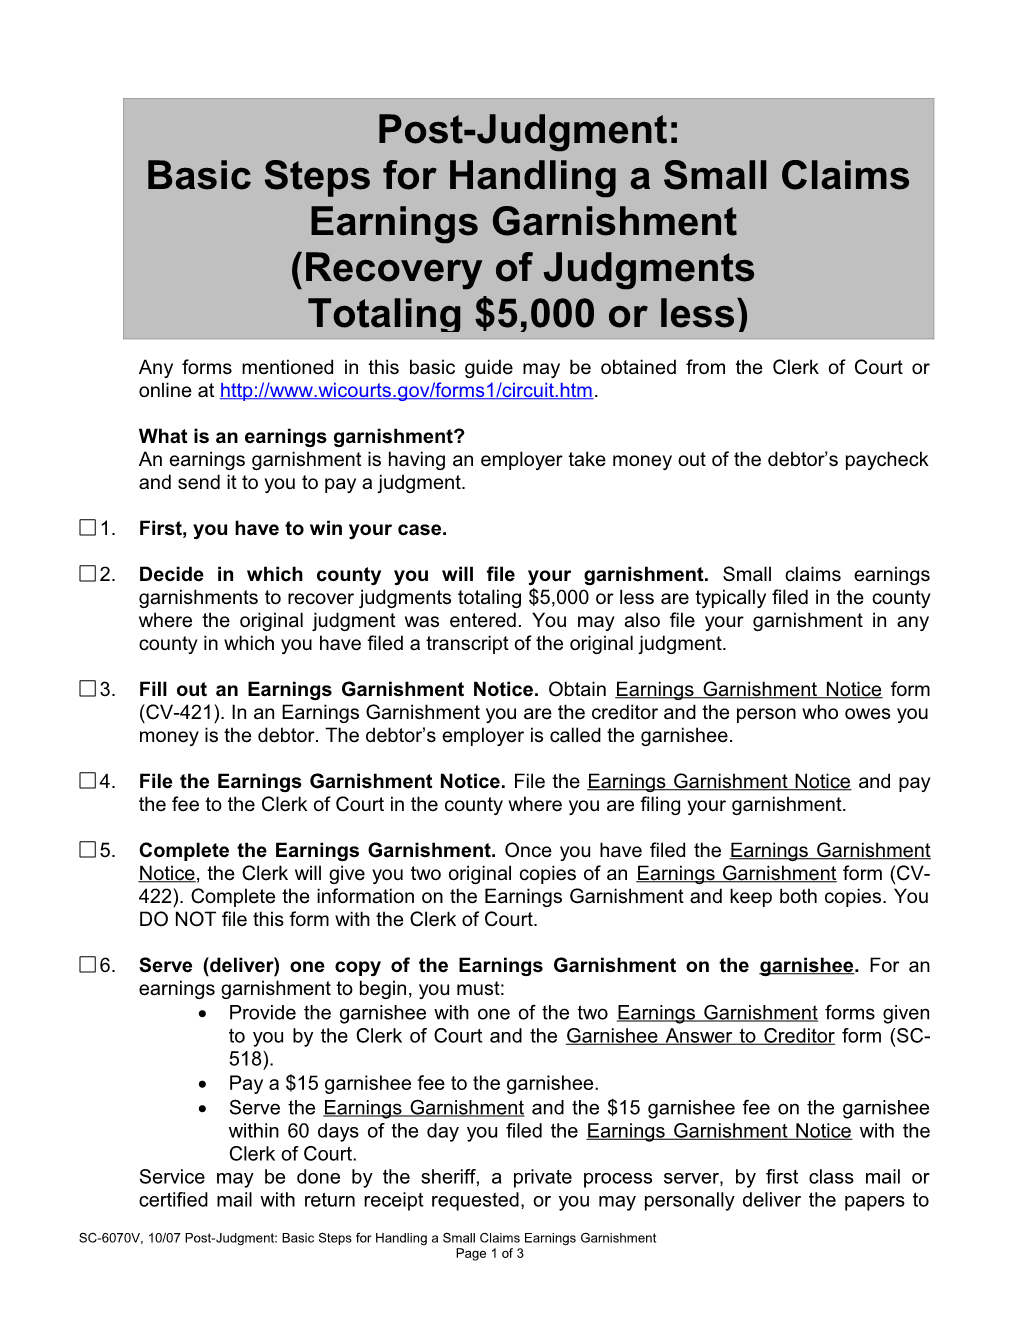 SC-6070: Post-Judgment: Basic Steps for Handling a Small Claims Earnings Garnishment (Recovery